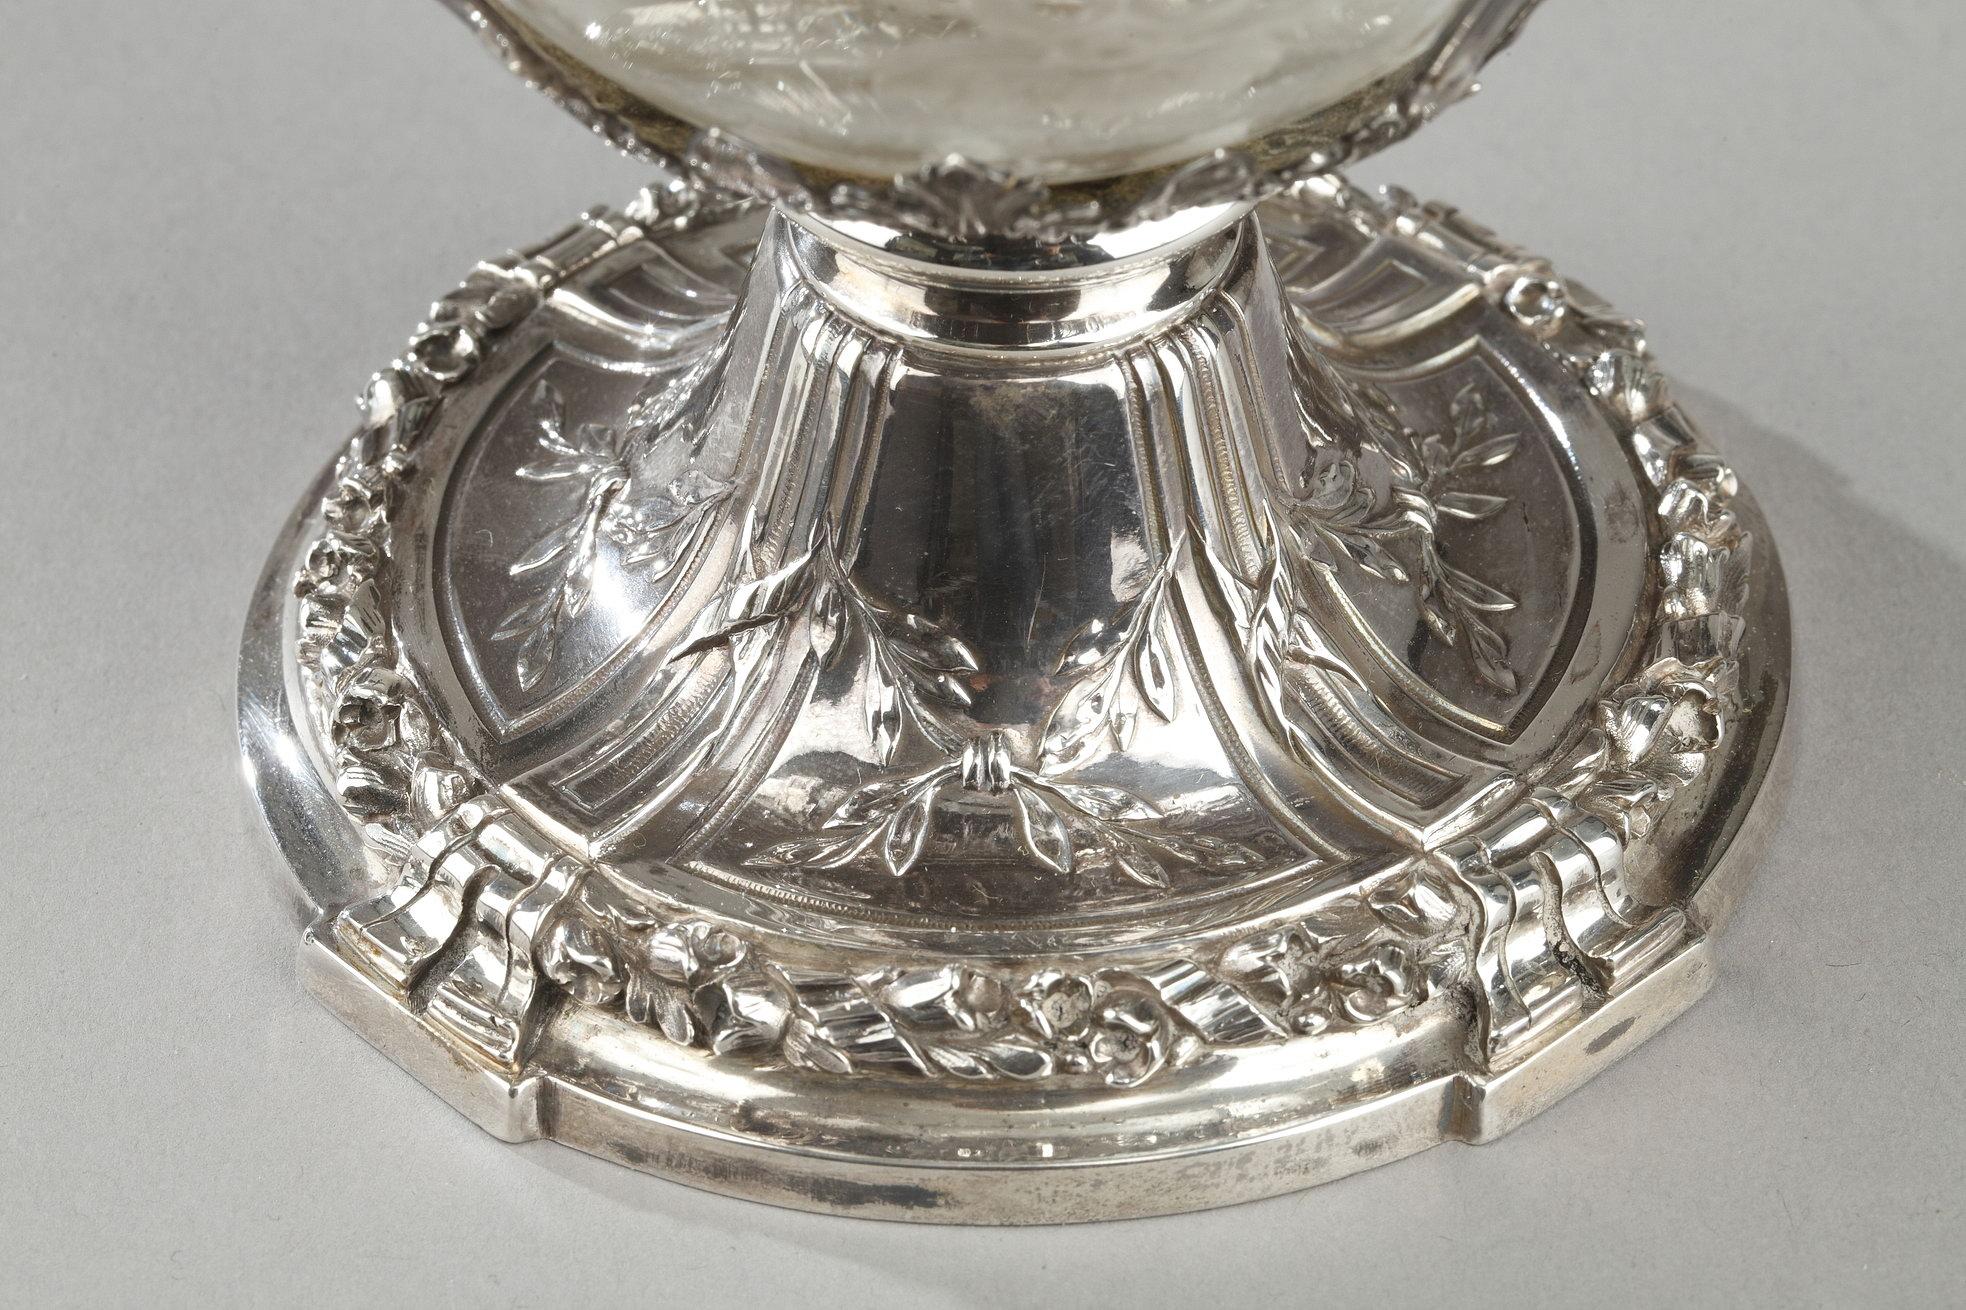 Pair of Cut-Glass Silver-Mounted Decanters, 19th Century, Edmond Tétard For Sale 6